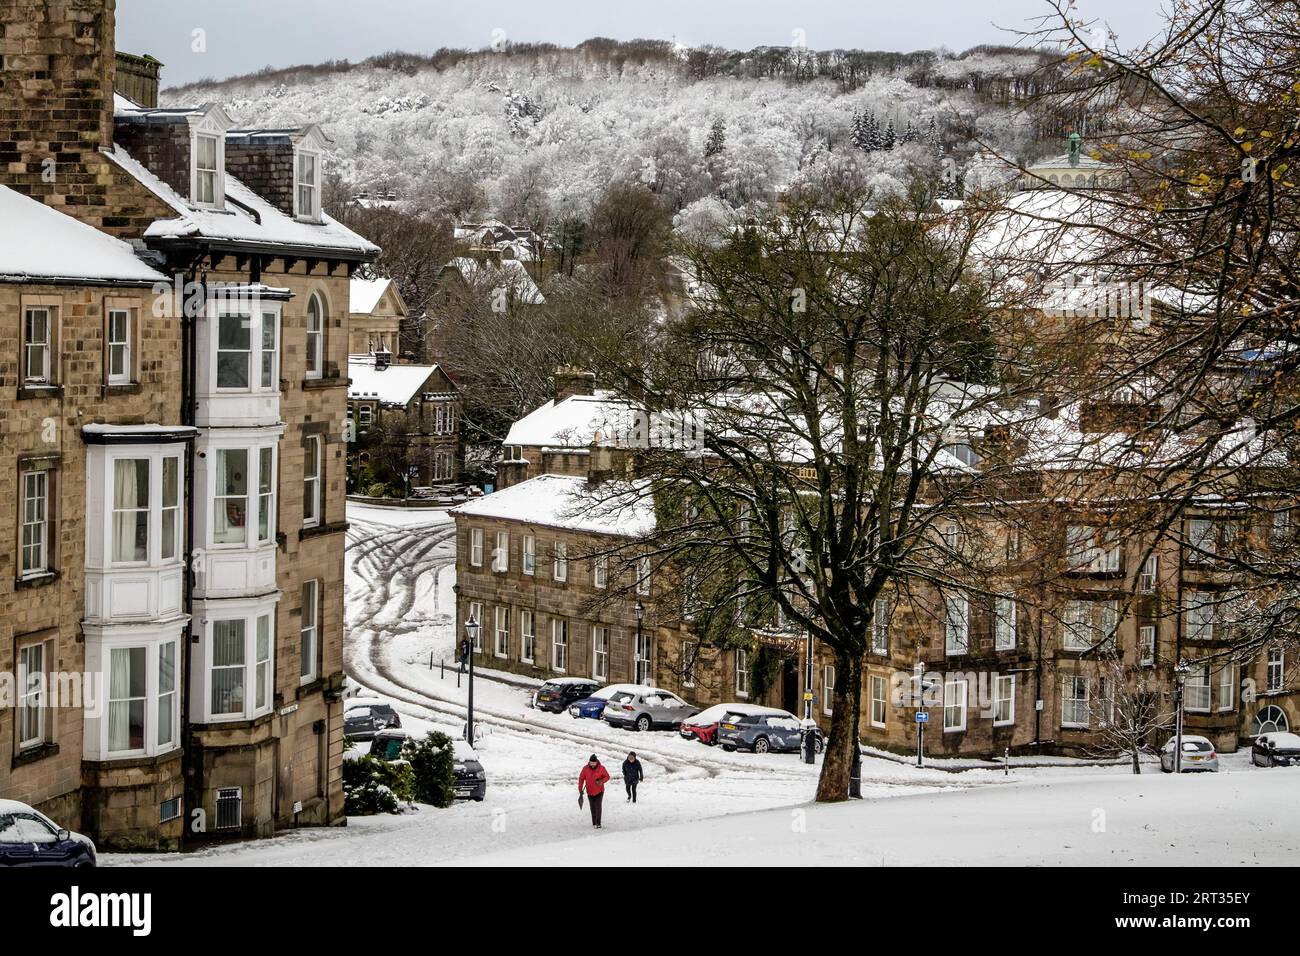 The Old Hall Hotel in The centre of Buxton in Derbyshire under a covering of winter snow Stock Photo